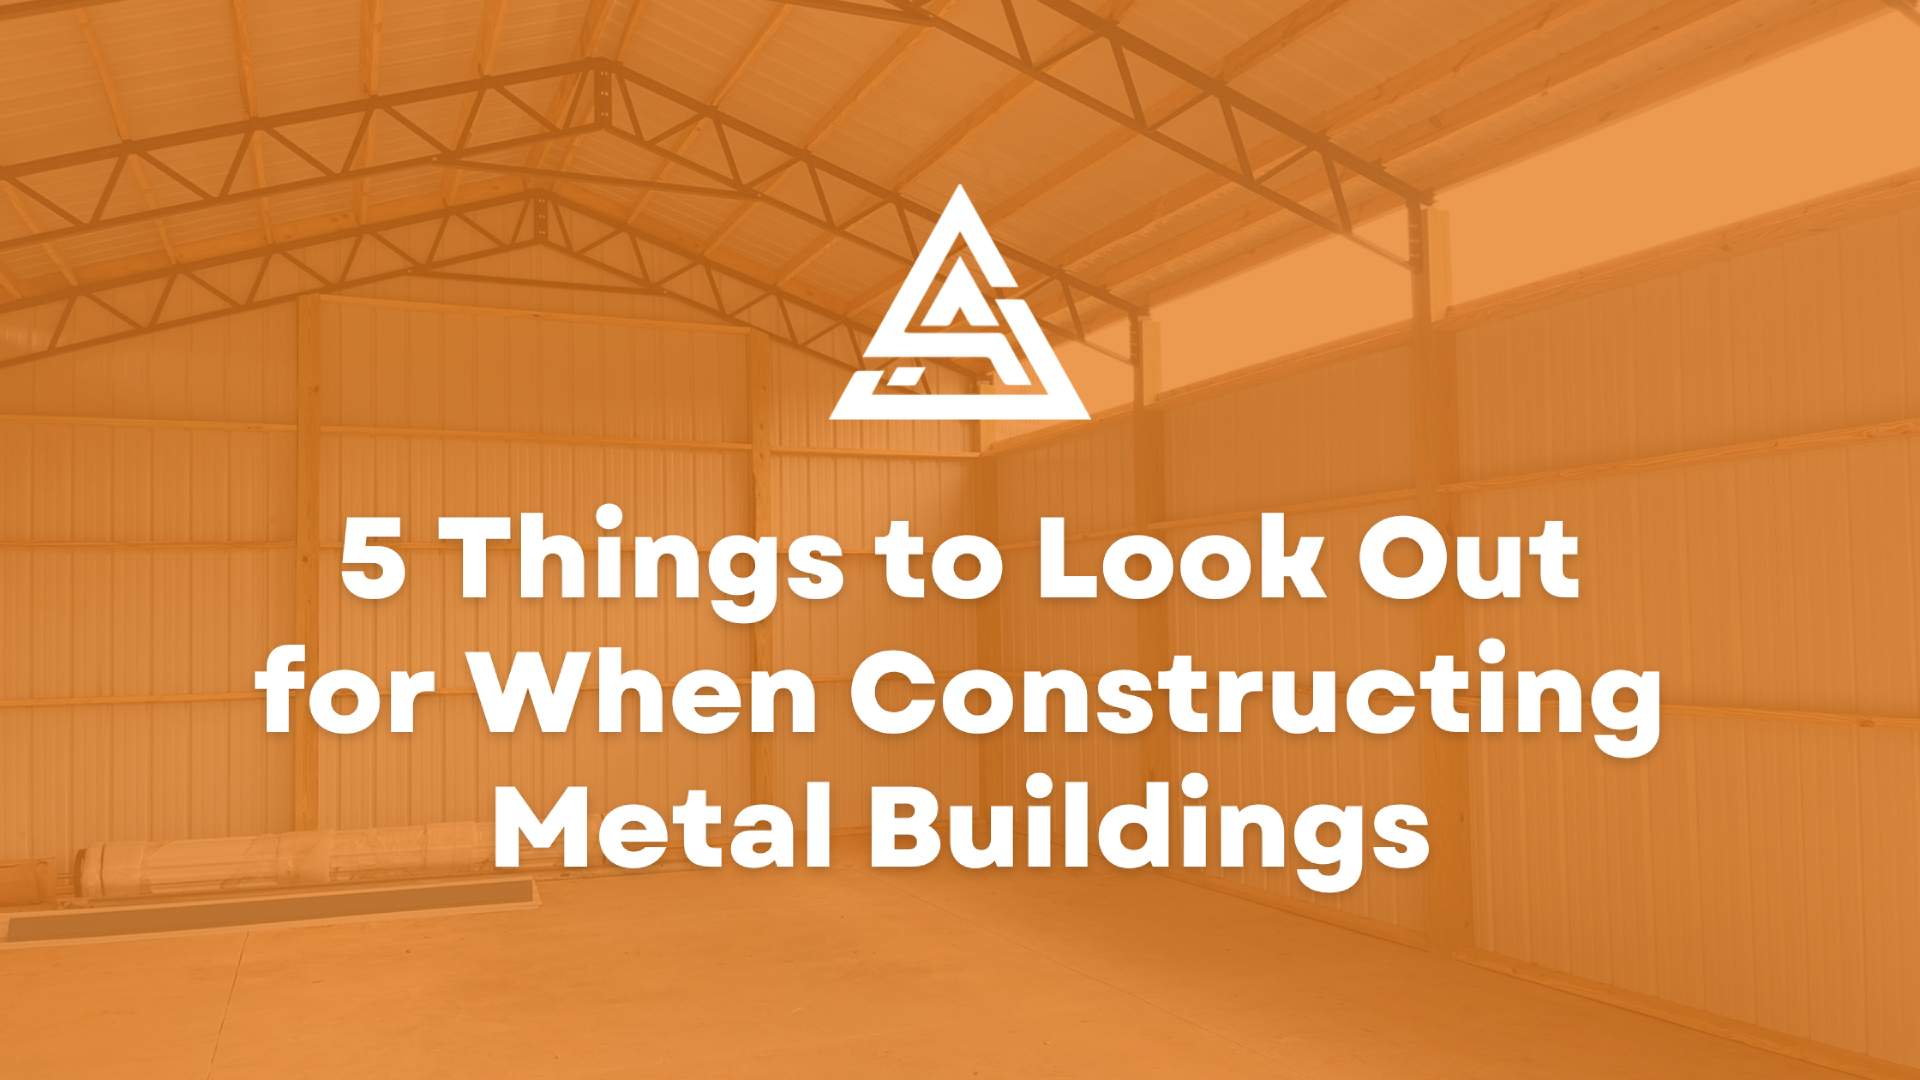 5 things to look out for when constructing metal buildings